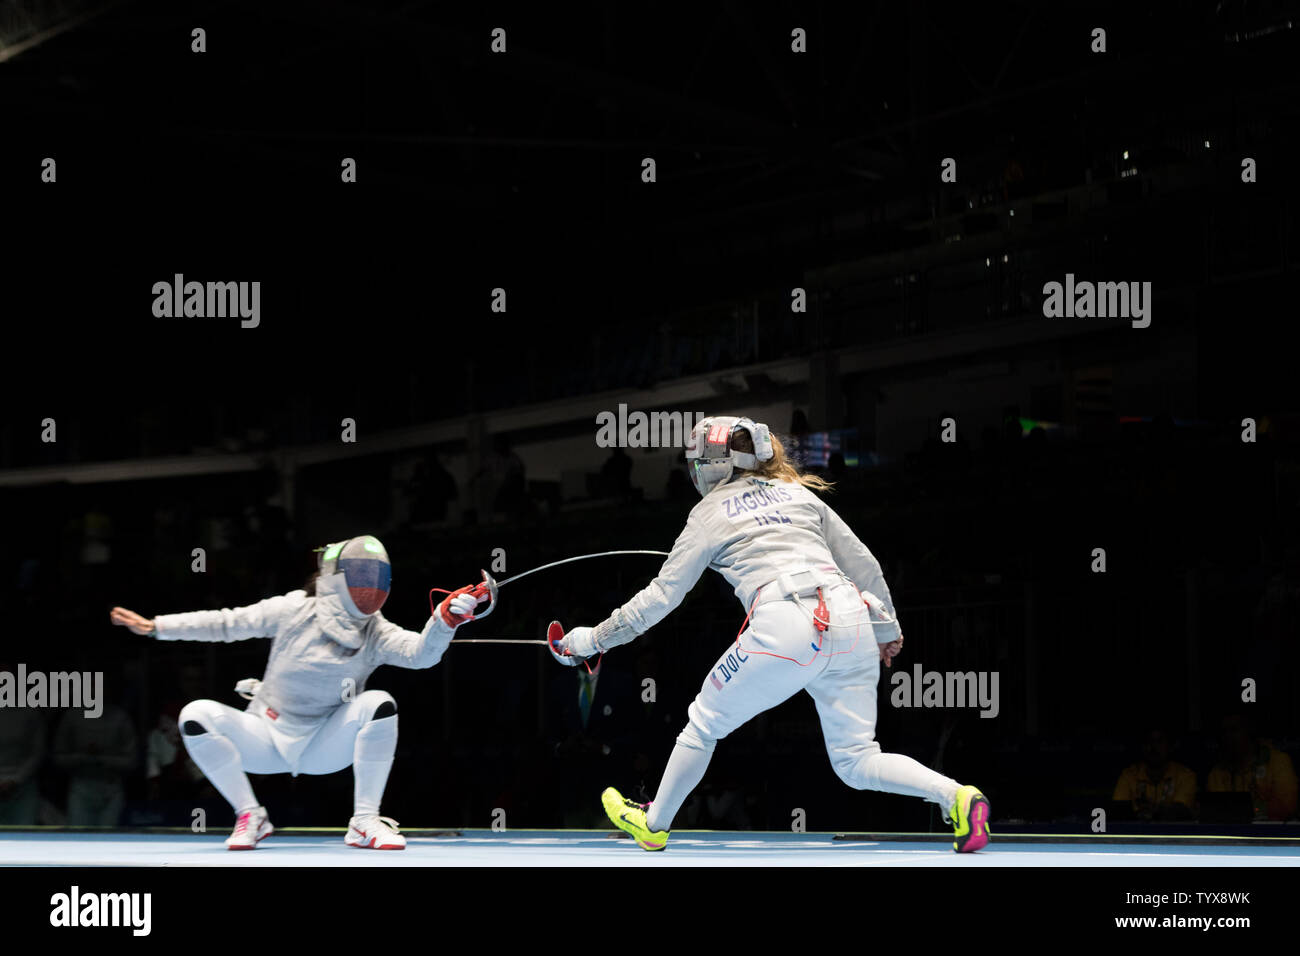 Fencer Mariel Zagunis of the United States, right, competes against Yana Egorian of Russia in the Women's Team Saber semifinals at Carioca 3 Arena at the 2016 Rio Summer Olympics in Rio de Janeiro, Brazil, on August 13, 2016.  The United States lost 45-42 to Russia and will now compete with Italy for the bronze medal.      Photo by Richard Ellis/UPI.. Stock Photo